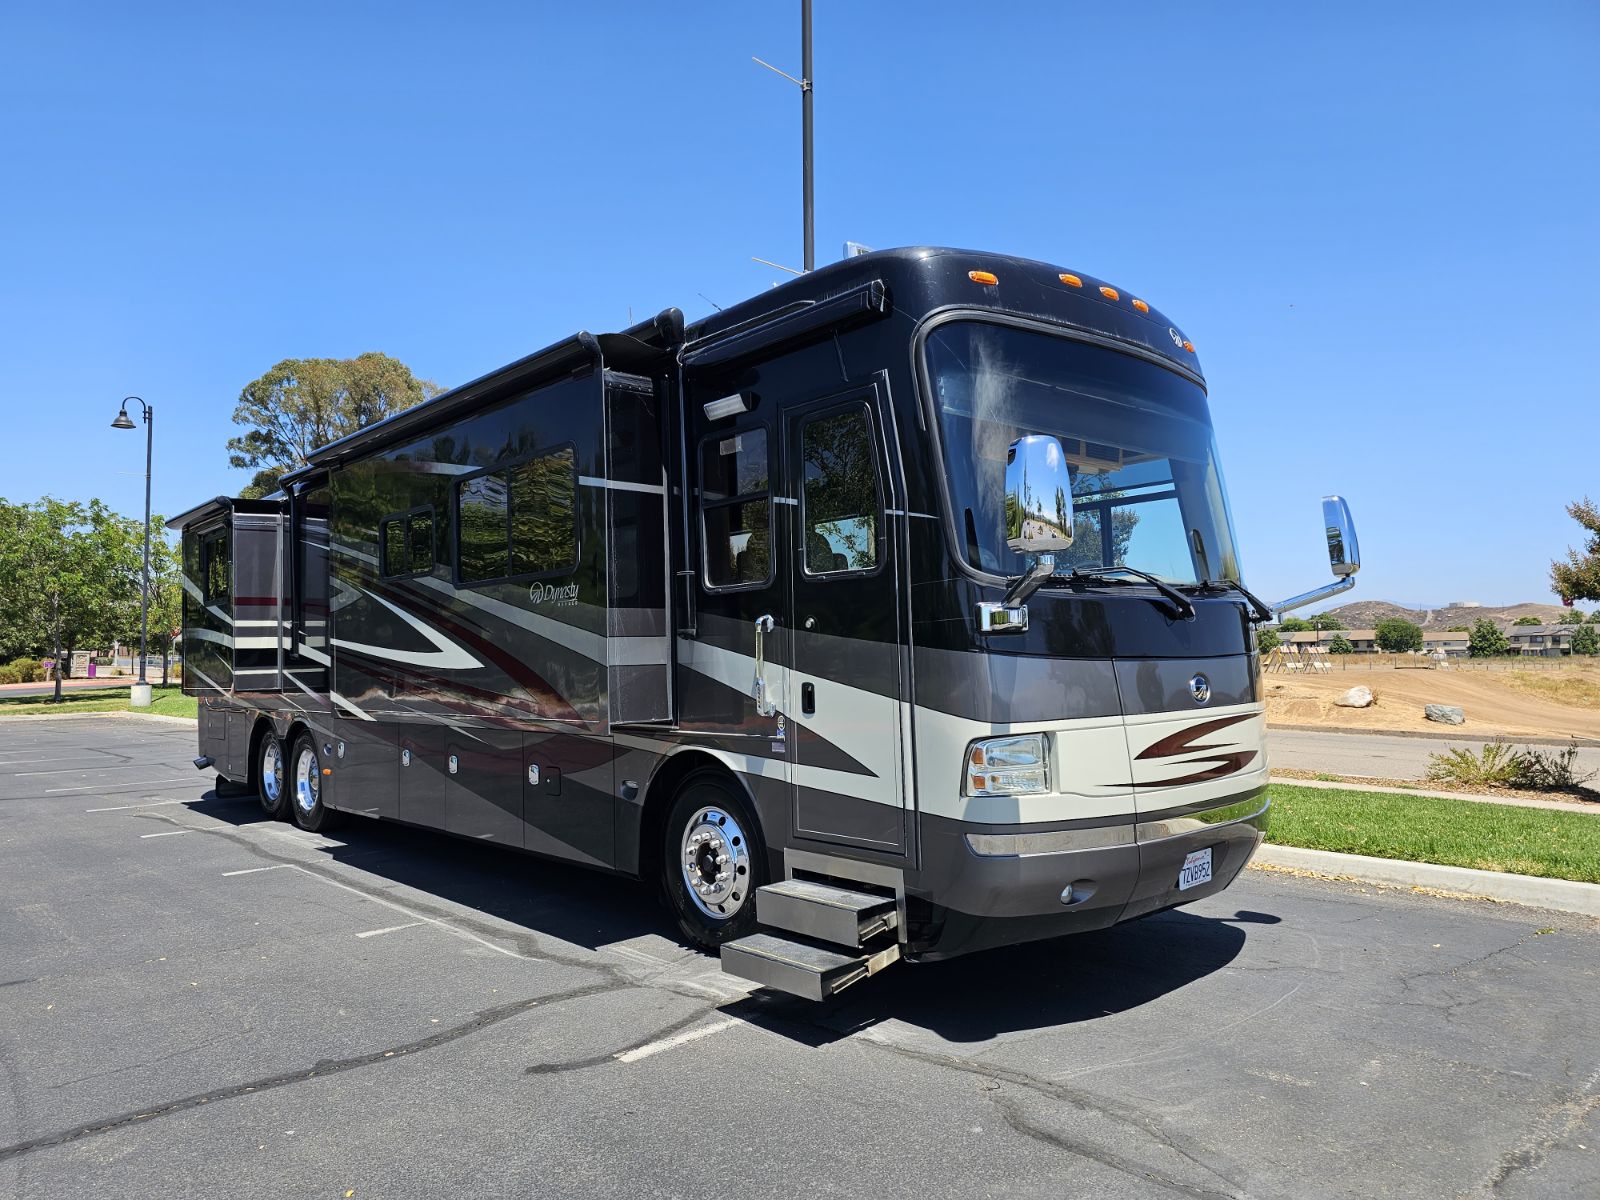 San Diego RV can buy your RV today!